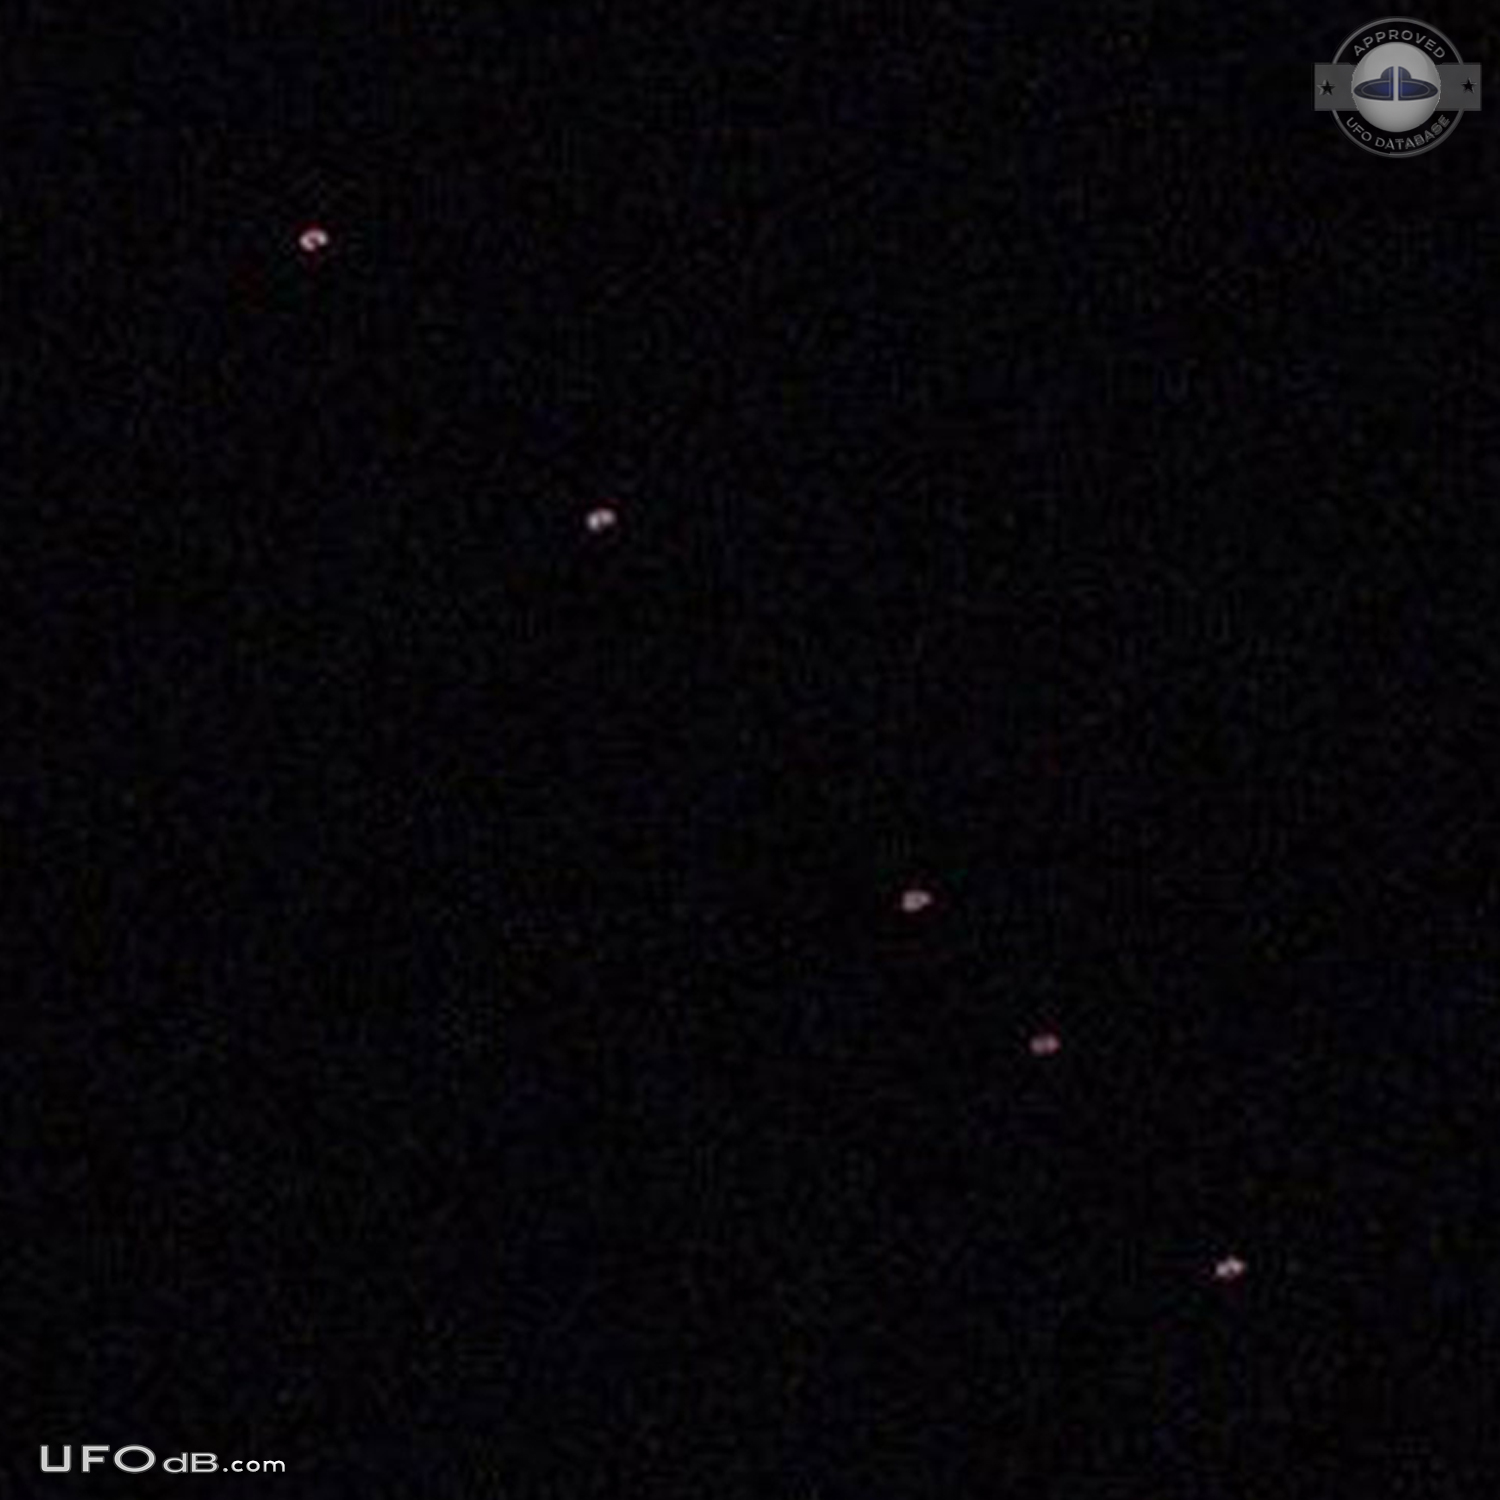 UFOs seen by several Marines over Camp Leatherneck, Afghanistan 2010 UFO Picture #490-2